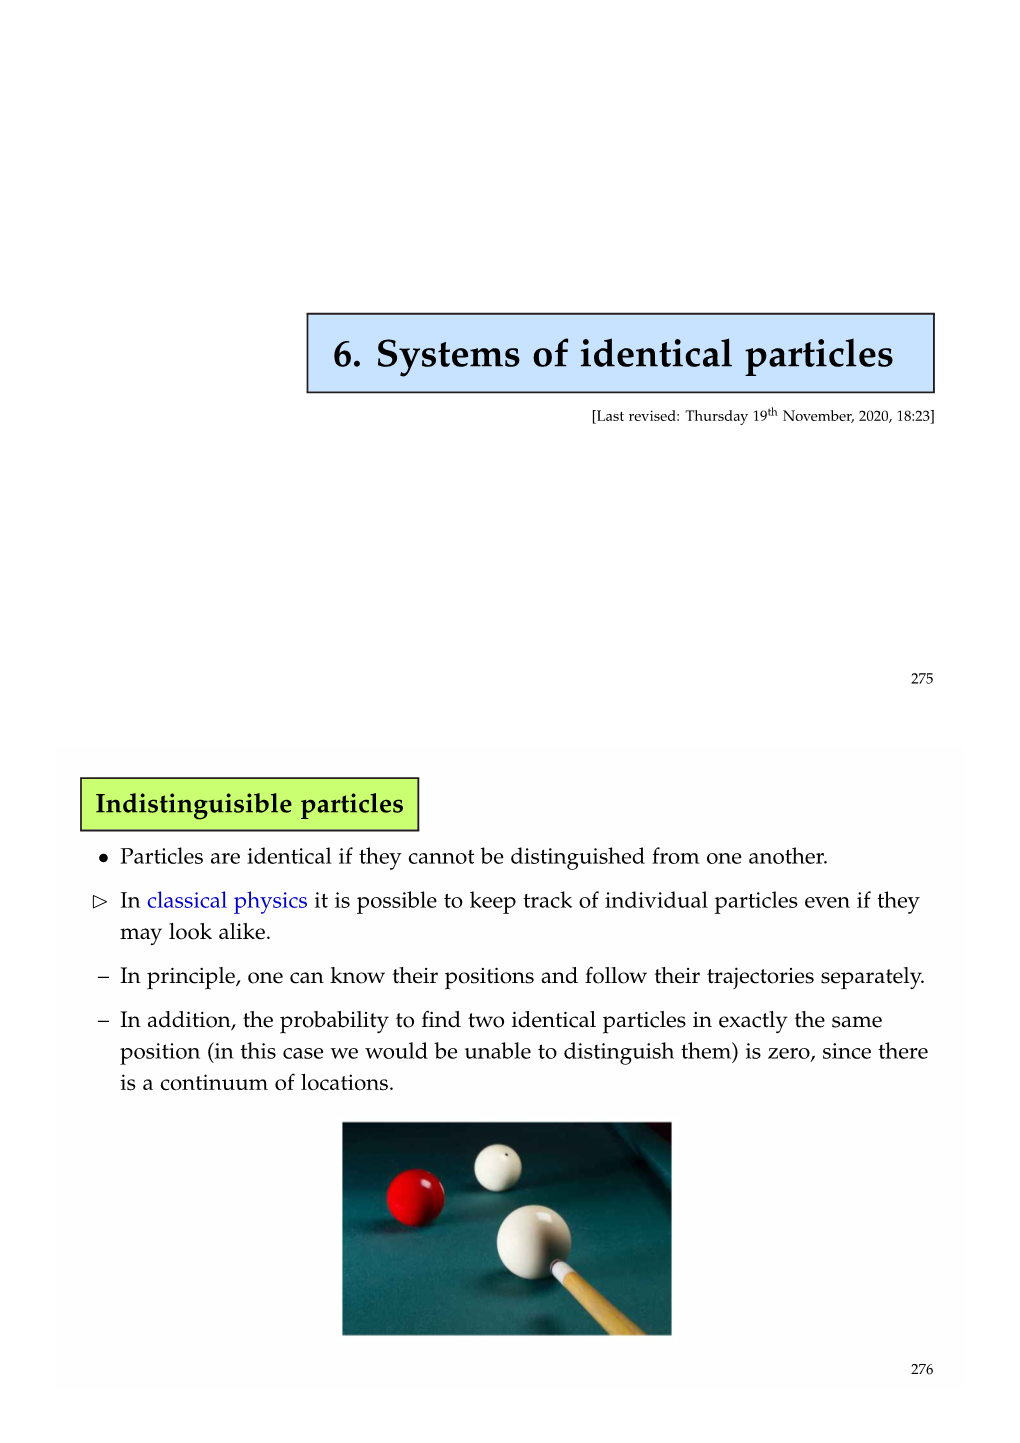 6. Systems of Identical Particles